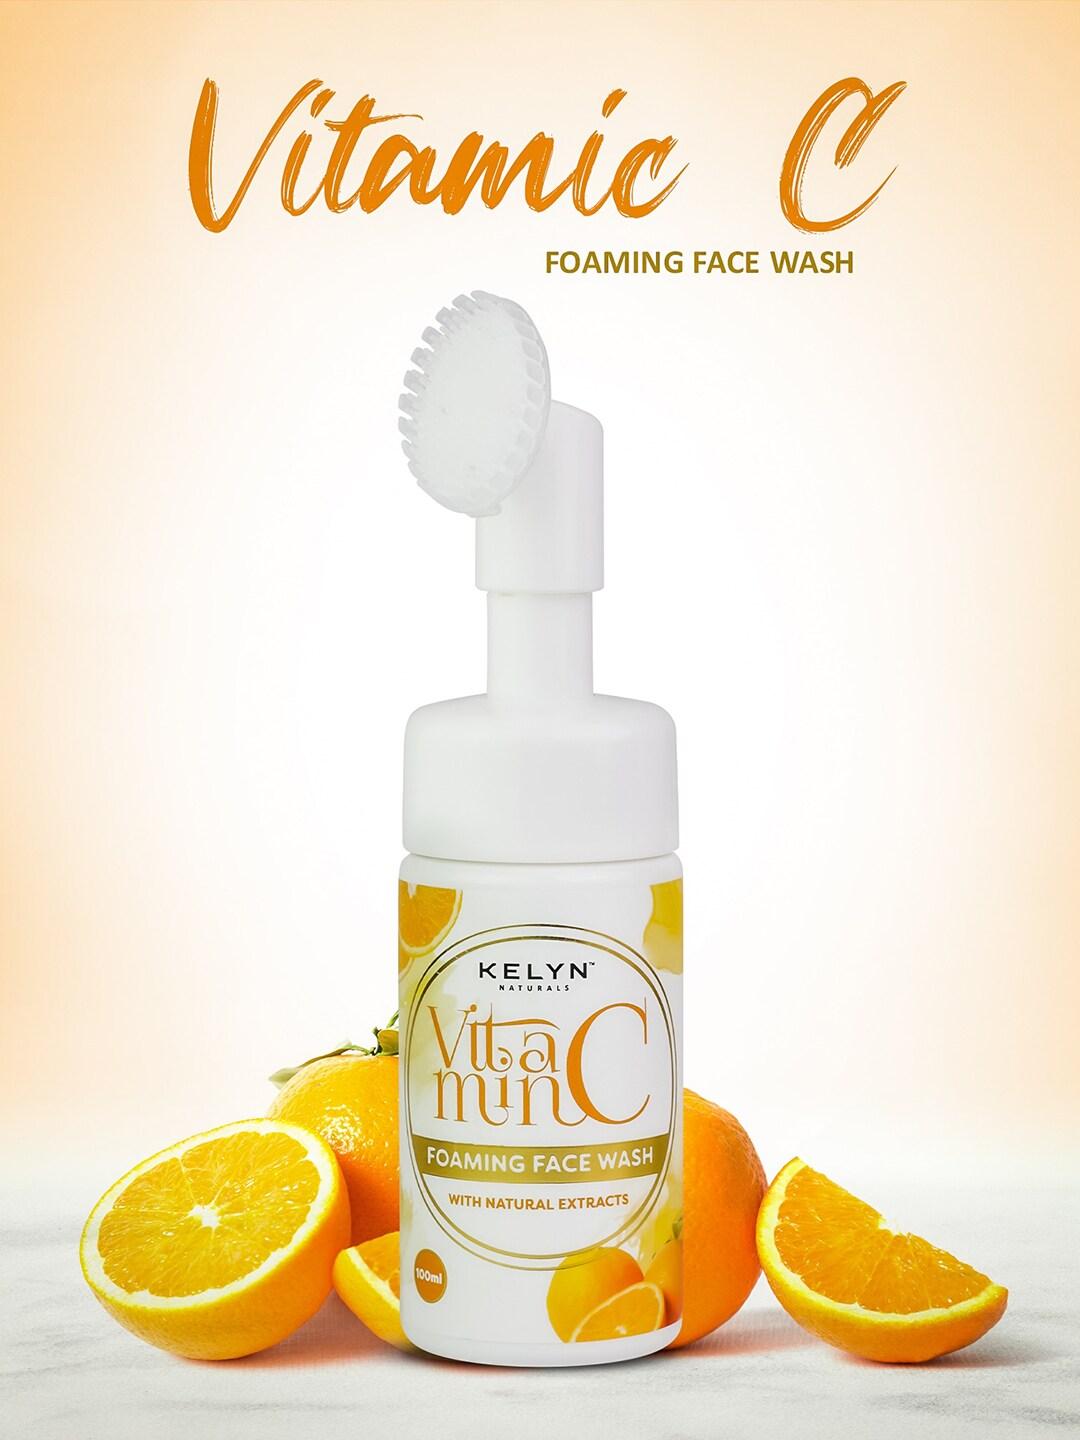 KELYN Set Of 2 Vitamin C Foaming Face Wash With Built-In Face Brush - 100ml Each